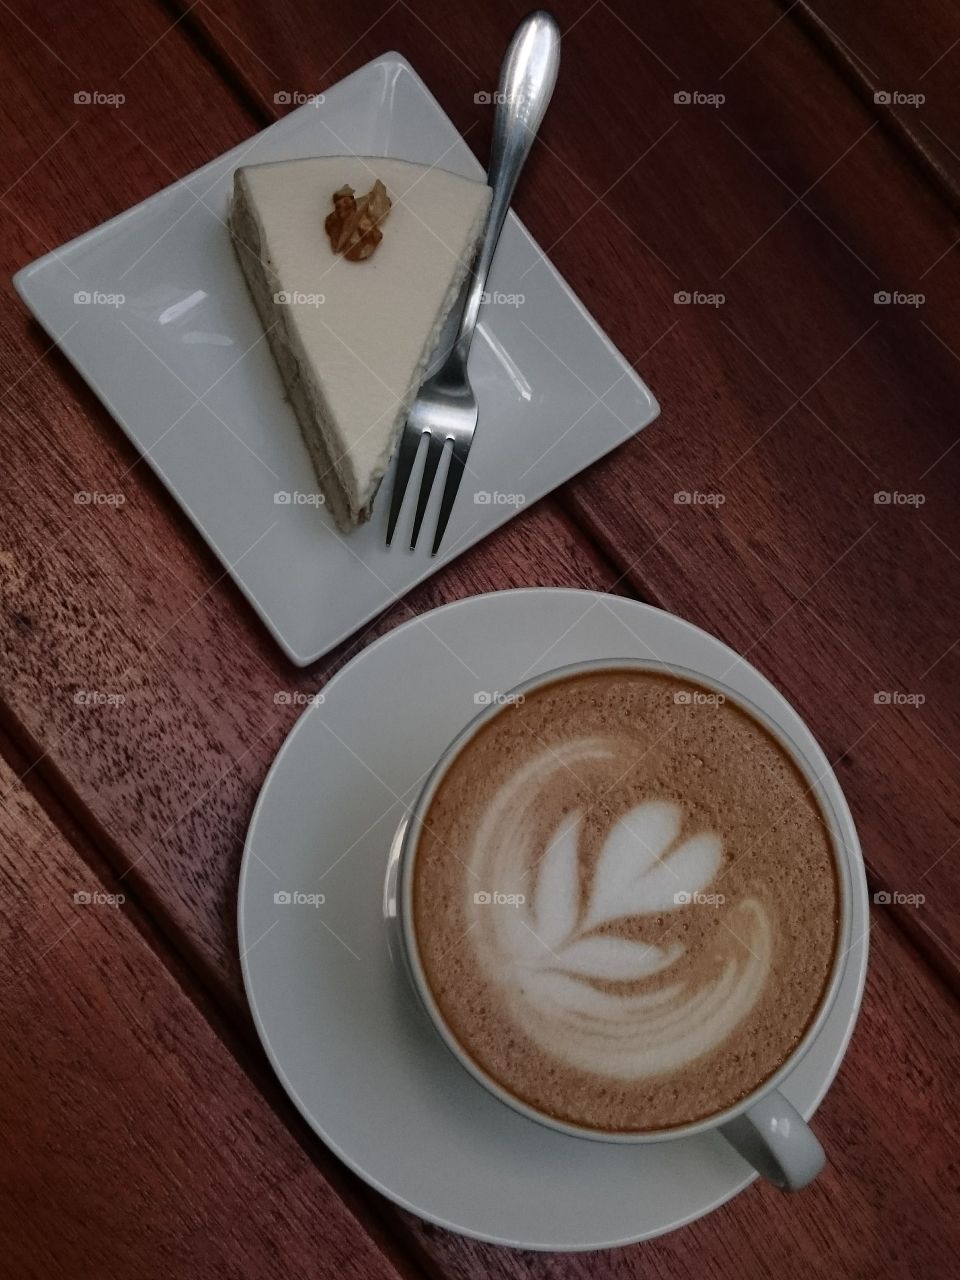 Coffee lover. feeling heaven with your favorite drinks and a slice of cake 